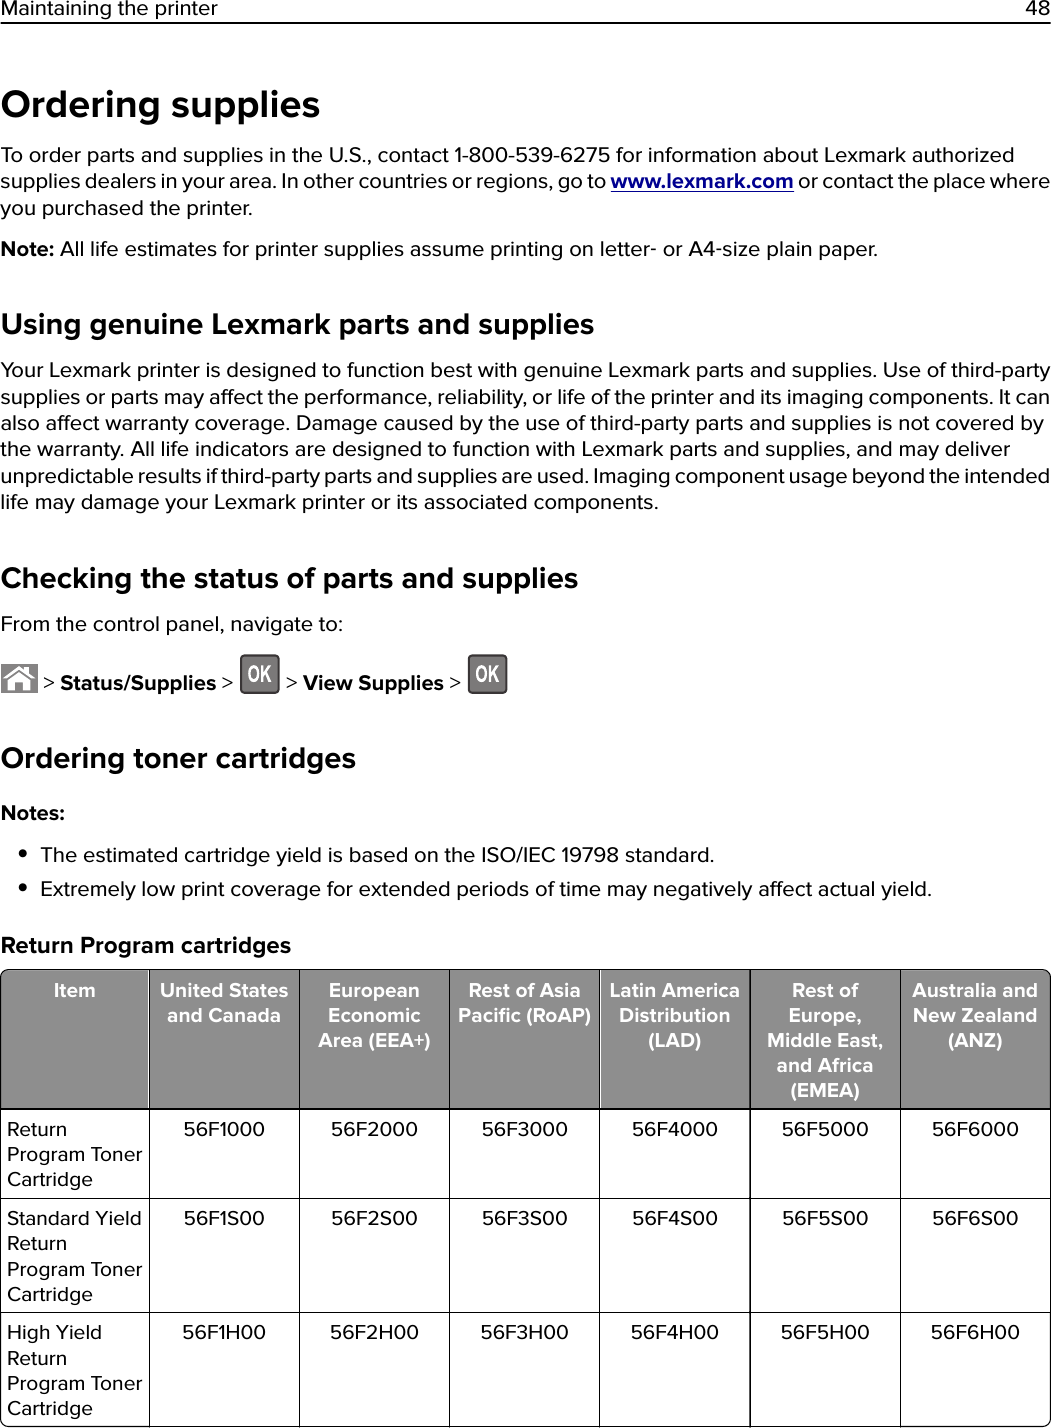 Ordering suppliesTo order parts and supplies in the U.S., contact 1-800-539-6275 for information about Lexmark authorizedsupplies dealers in your area. In other countries or regions, go to www.lexmark.com or contact the place whereyou purchased the printer.Note: All life estimates for printer supplies assume printing on letter‑ or A4‑size plain paper.Using genuine Lexmark parts and suppliesYour Lexmark printer is designed to function best with genuine Lexmark parts and supplies. Use of third-partysupplies or parts may aect the performance, reliability, or life of the printer and its imaging components. It canalso aect warranty coverage. Damage caused by the use of third-party parts and supplies is not covered bythe warranty. All life indicators are designed to function with Lexmark parts and supplies, and may deliverunpredictable results if third-party parts and supplies are used. Imaging component usage beyond the intendedlife may damage your Lexmark printer or its associated components.Checking the status of parts and suppliesFrom the control panel, navigate to: &gt; Status/Supplies &gt;   &gt; View Supplies &gt; Ordering toner cartridgesNotes:•The estimated cartridge yield is based on the ISO/IEC 19798 standard.•Extremely low print coverage for extended periods of time may negatively aect actual yield.Return Program cartridgesItem United Statesand CanadaEuropeanEconomicArea (EEA+)Rest of AsiaPaciﬁc (RoAP)Latin AmericaDistribution(LAD)Rest ofEurope,Middle East,and Africa(EMEA)Australia andNew Zealand(ANZ)ReturnProgram TonerCartridge56F1000 56F2000 56F3000 56F4000 56F5000 56F6000Standard YieldReturnProgram TonerCartridge56F1S00 56F2S00 56F3S00 56F4S00 56F5S00 56F6S00High YieldReturnProgram TonerCartridge56F1H00 56F2H00 56F3H00 56F4H00 56F5H00 56F6H00Maintaining the printer 48